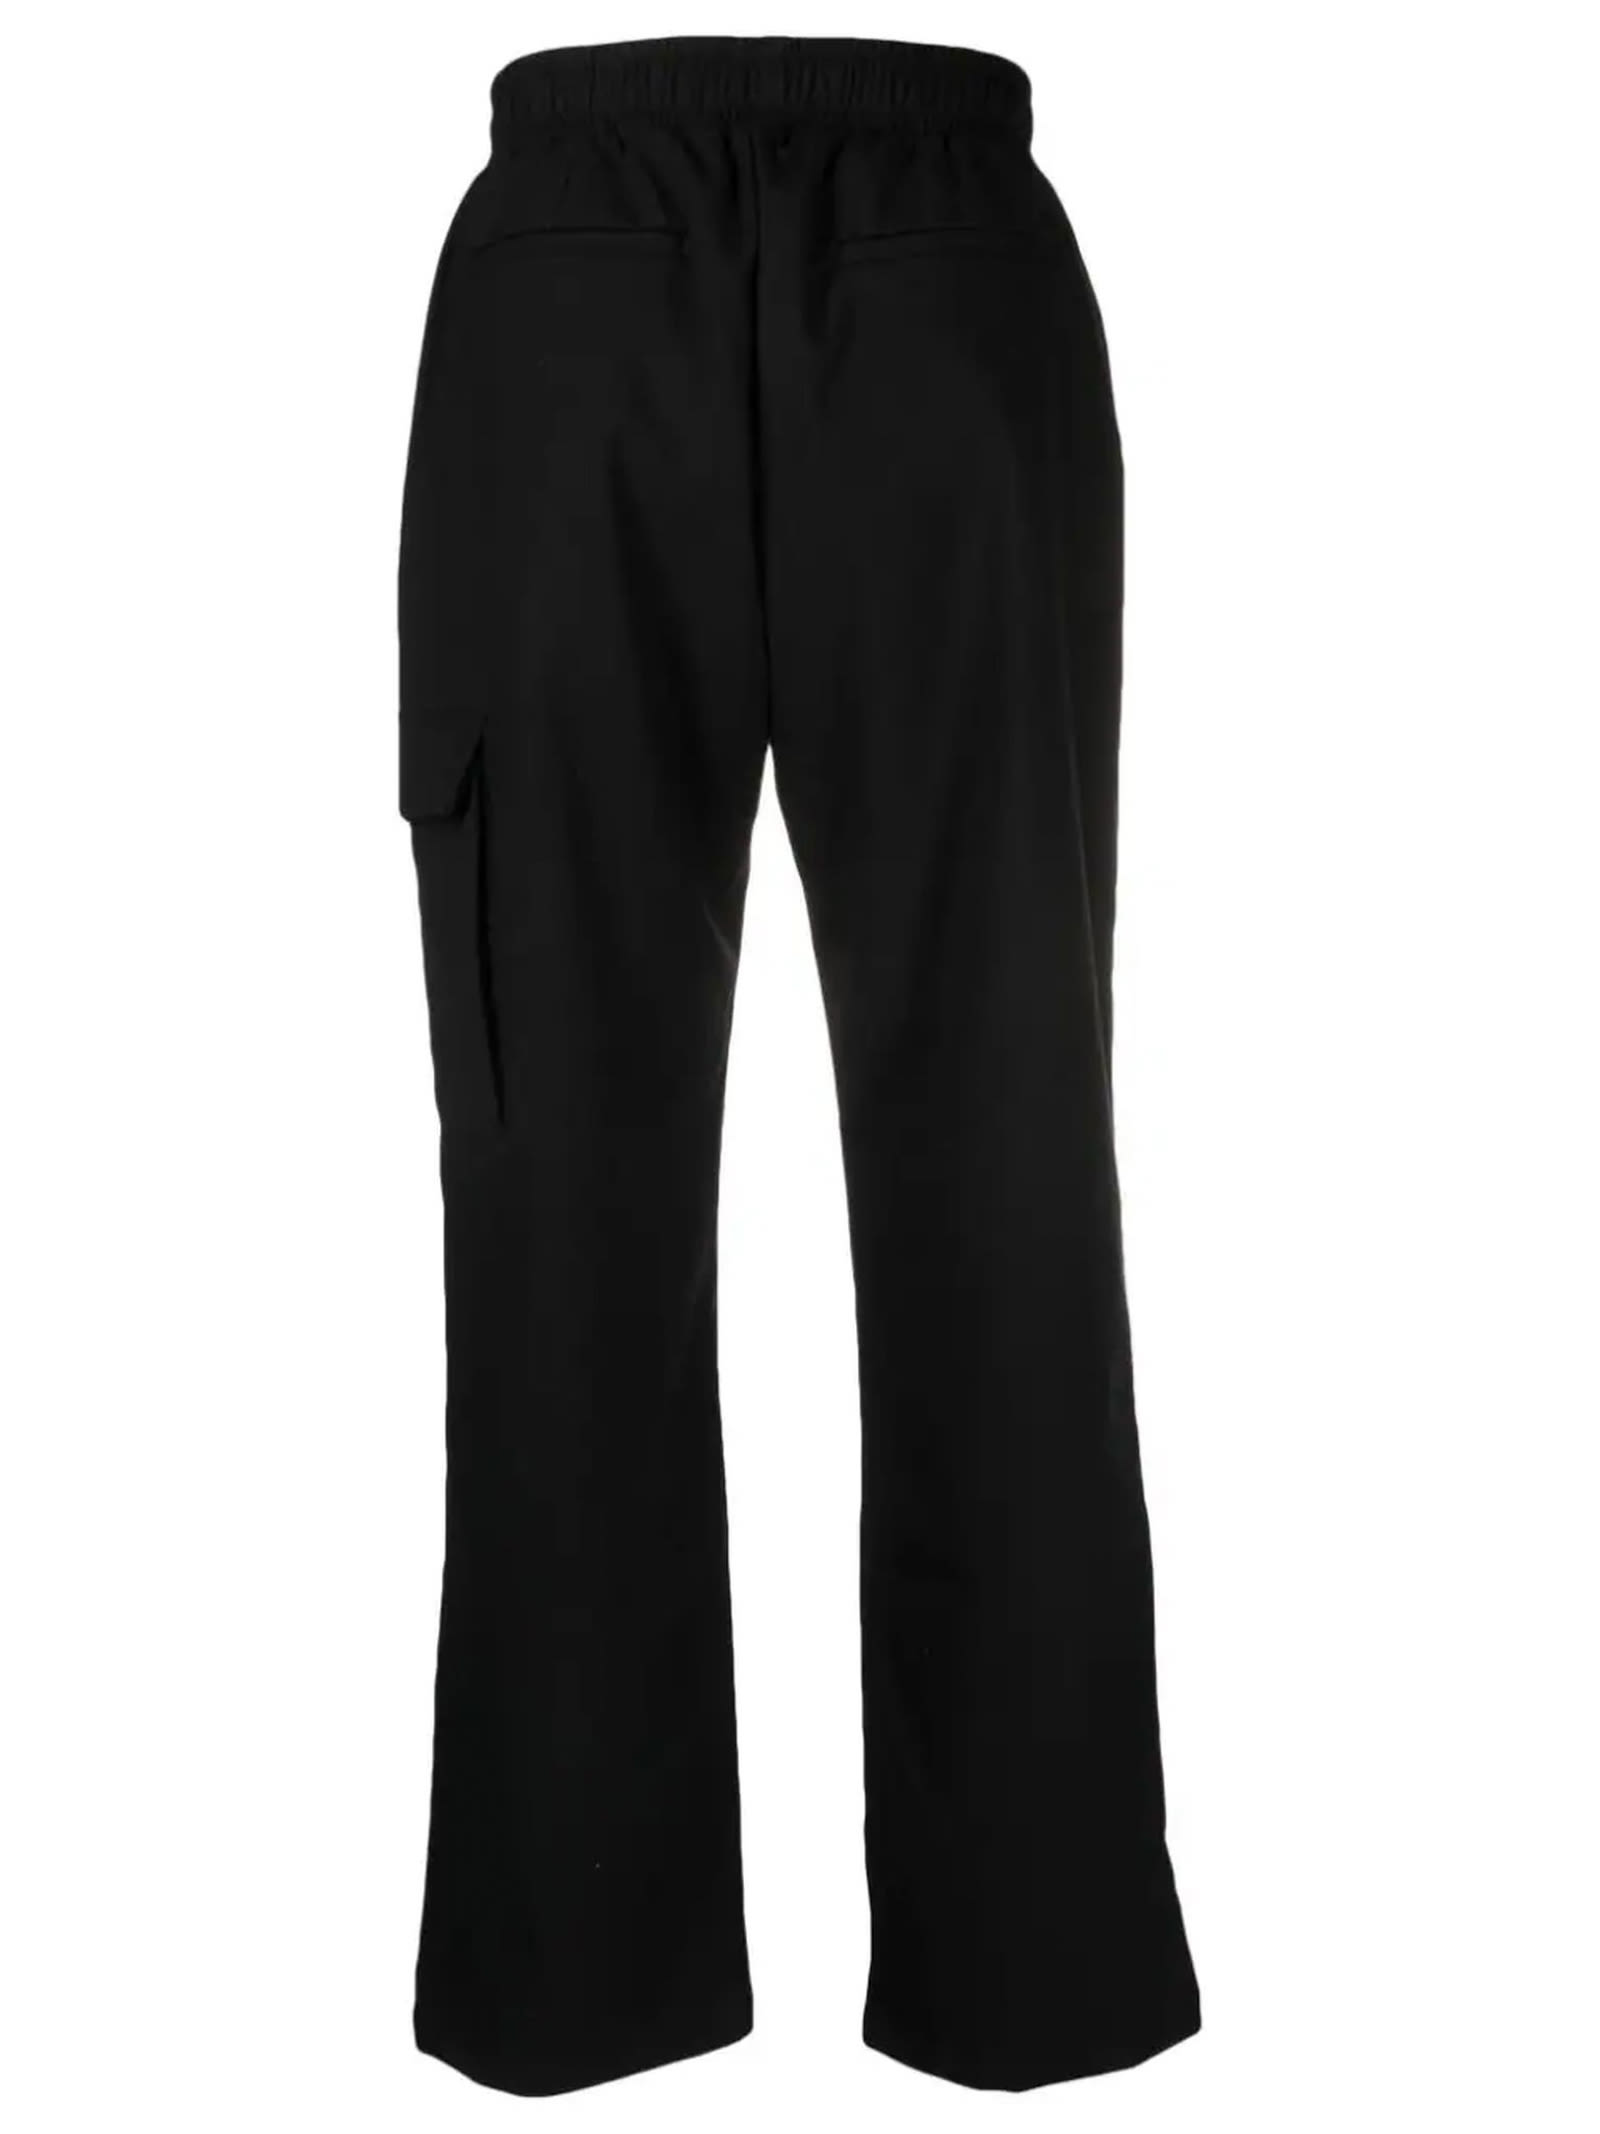 Shop Family First Milano Black Wool Blend Trousers